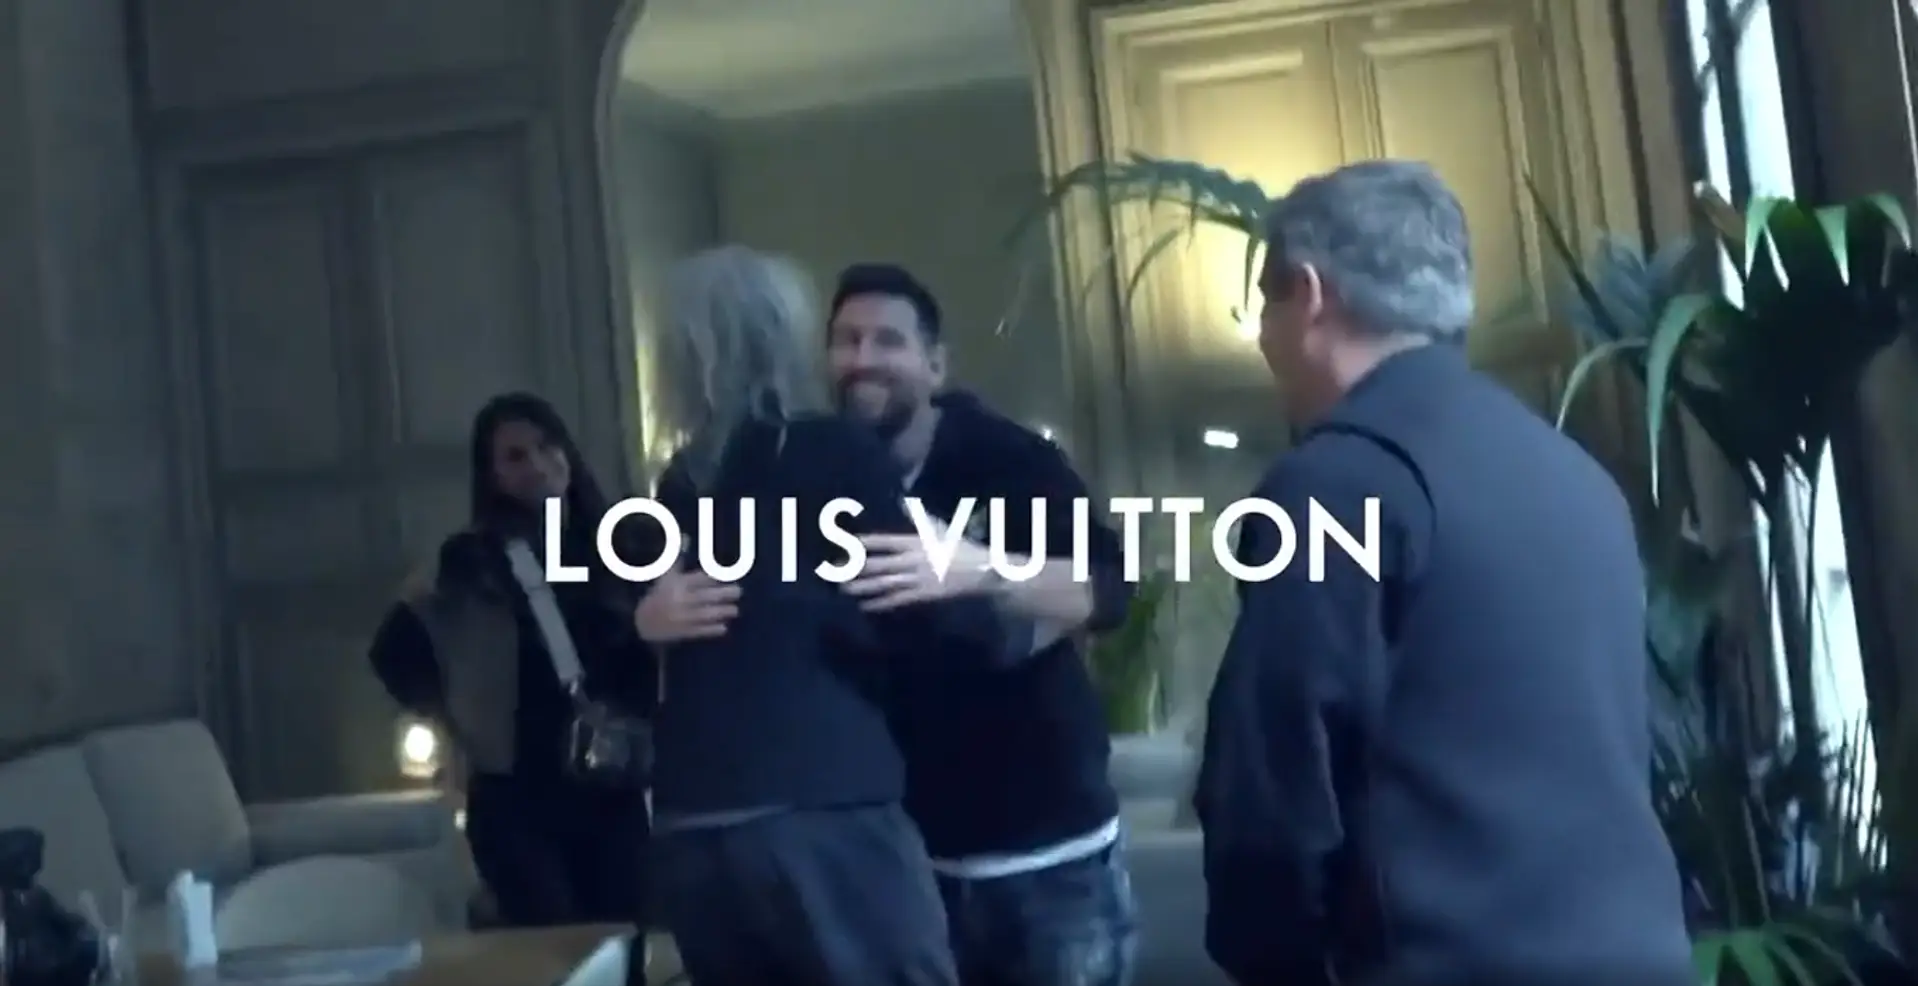 Cristiano Ronaldo And Lionel Messi Teamed Up For The Latest Louis Vuitton  Campaign That Breaks The Internet